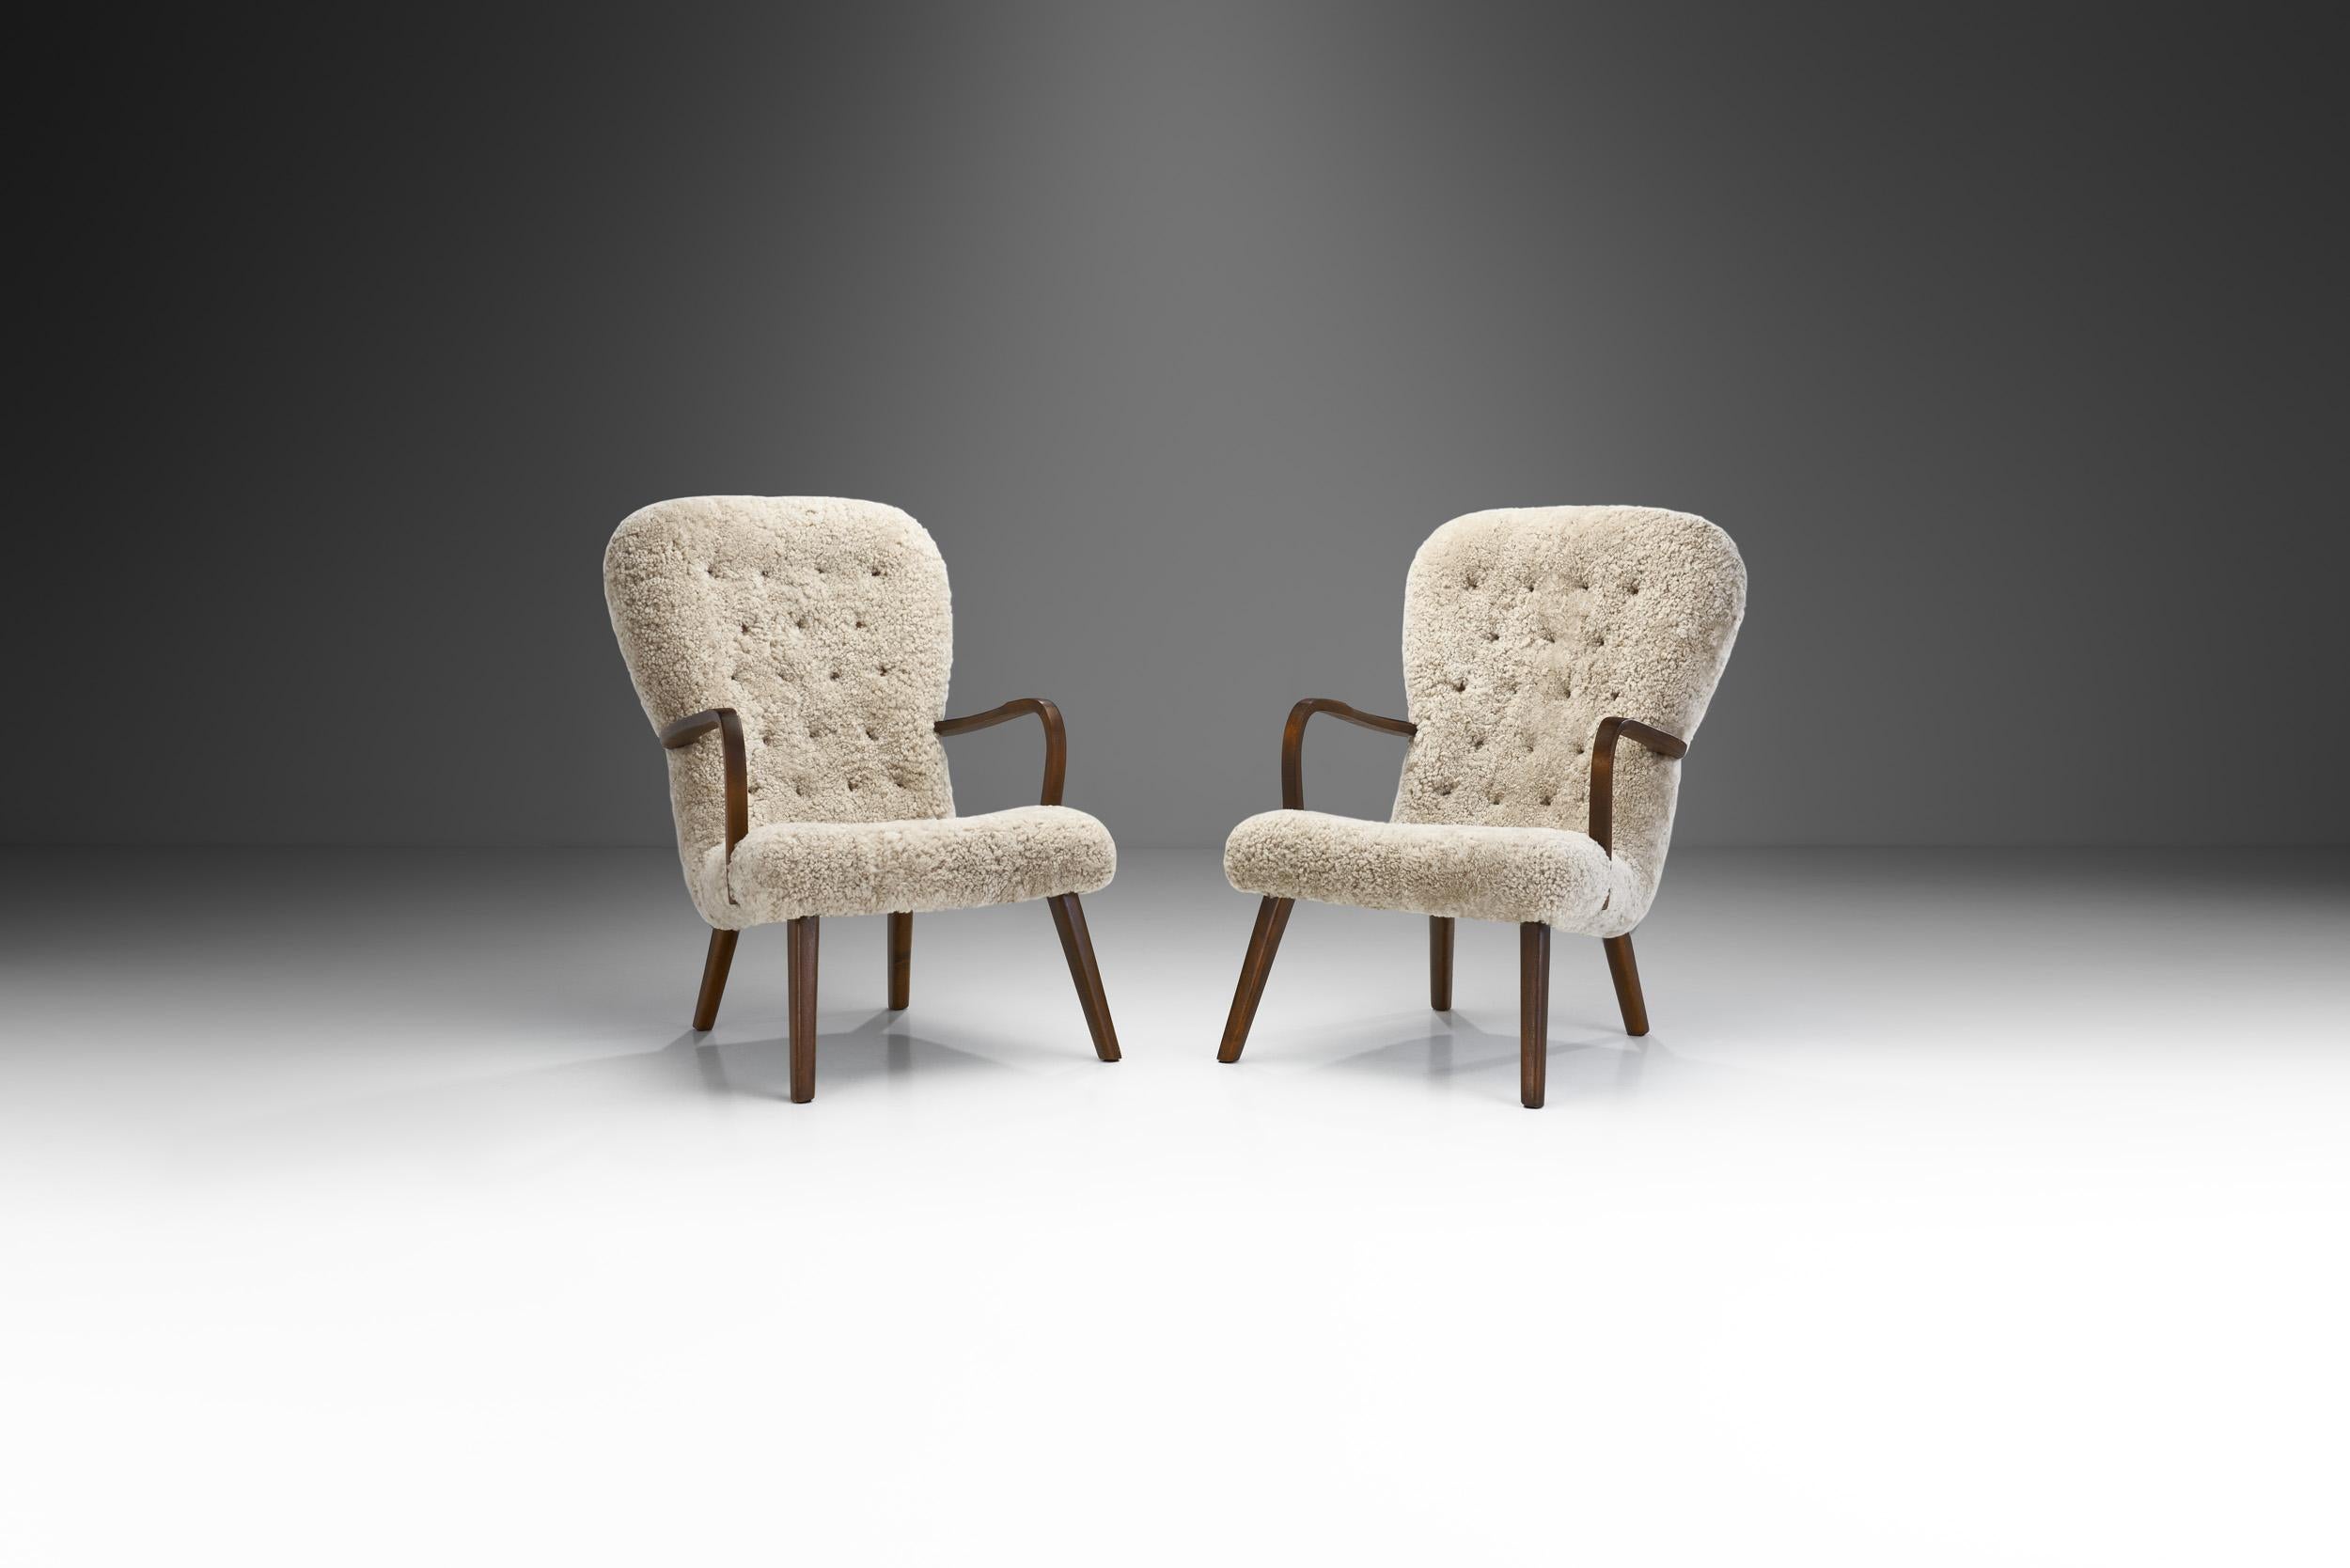 This pair of mid-century easy chairs revolves around high-quality materials, comfort and the mastery of Danish cabinetmakers.

Danish design is a remarkable combination of concern for comfort and materiality melded with a desire for Shaker-like